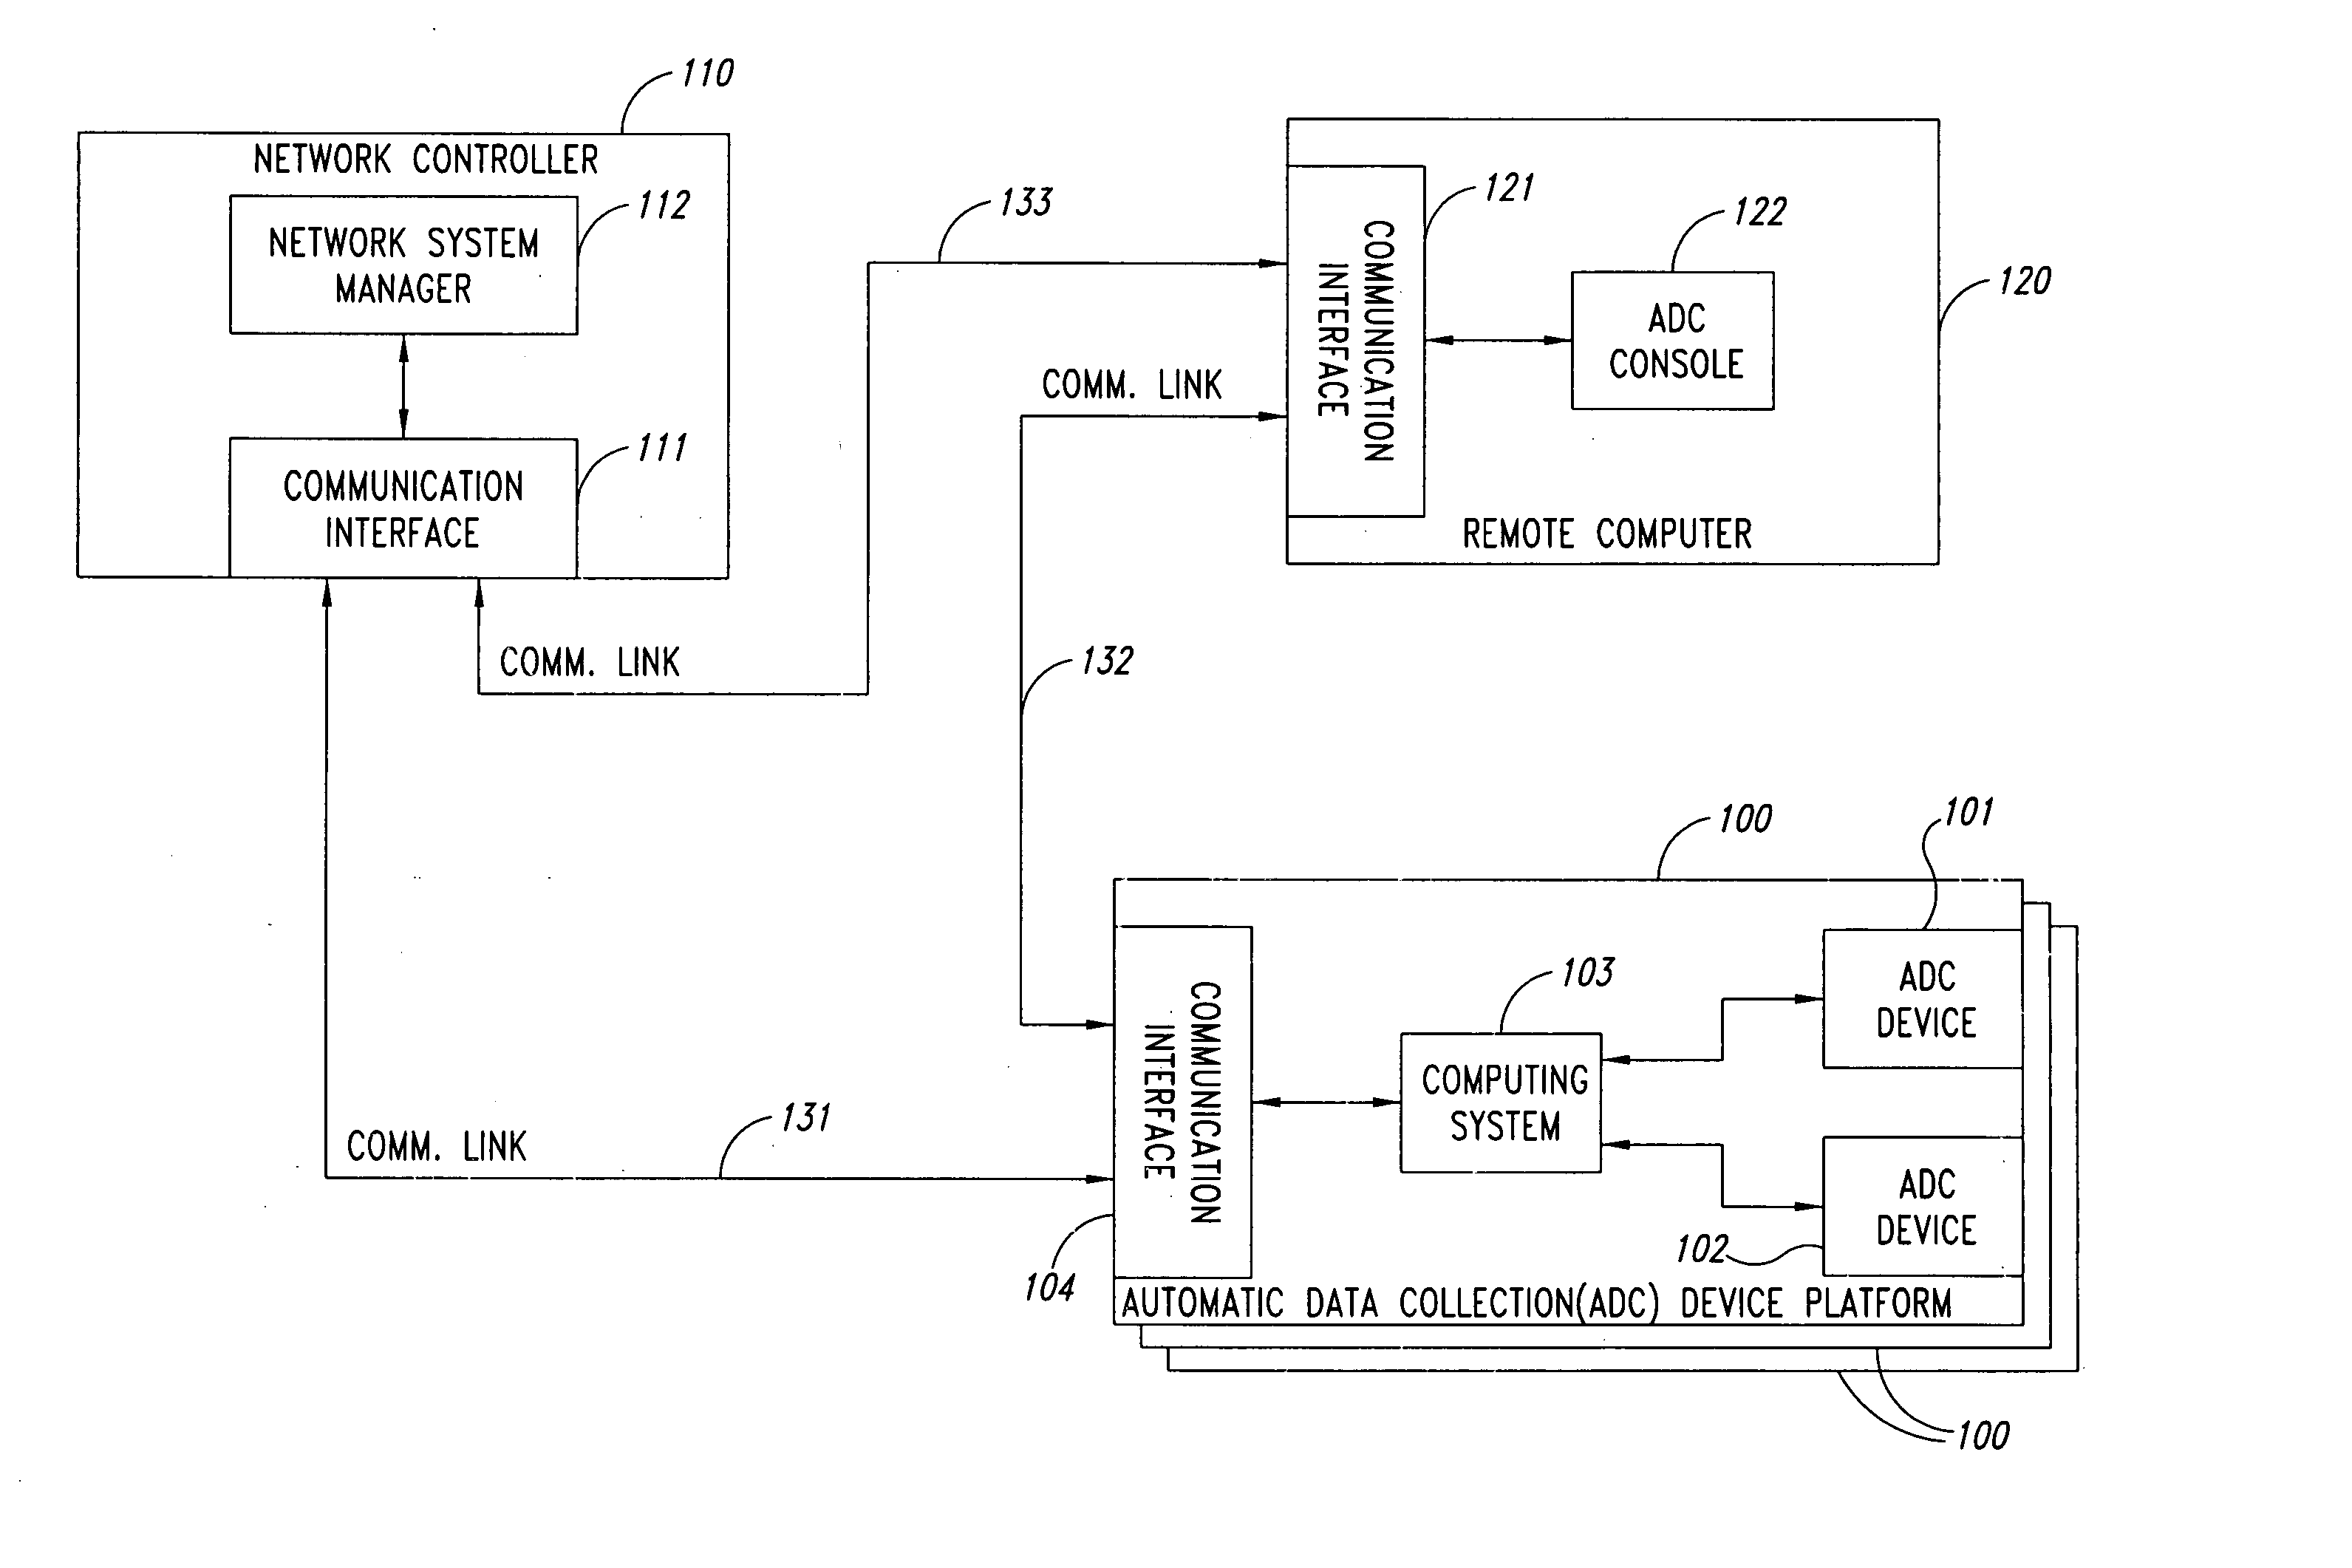 Remote anomaly diagnosis and reconfiguration of an automatic data collection device platform over a telecommunications network